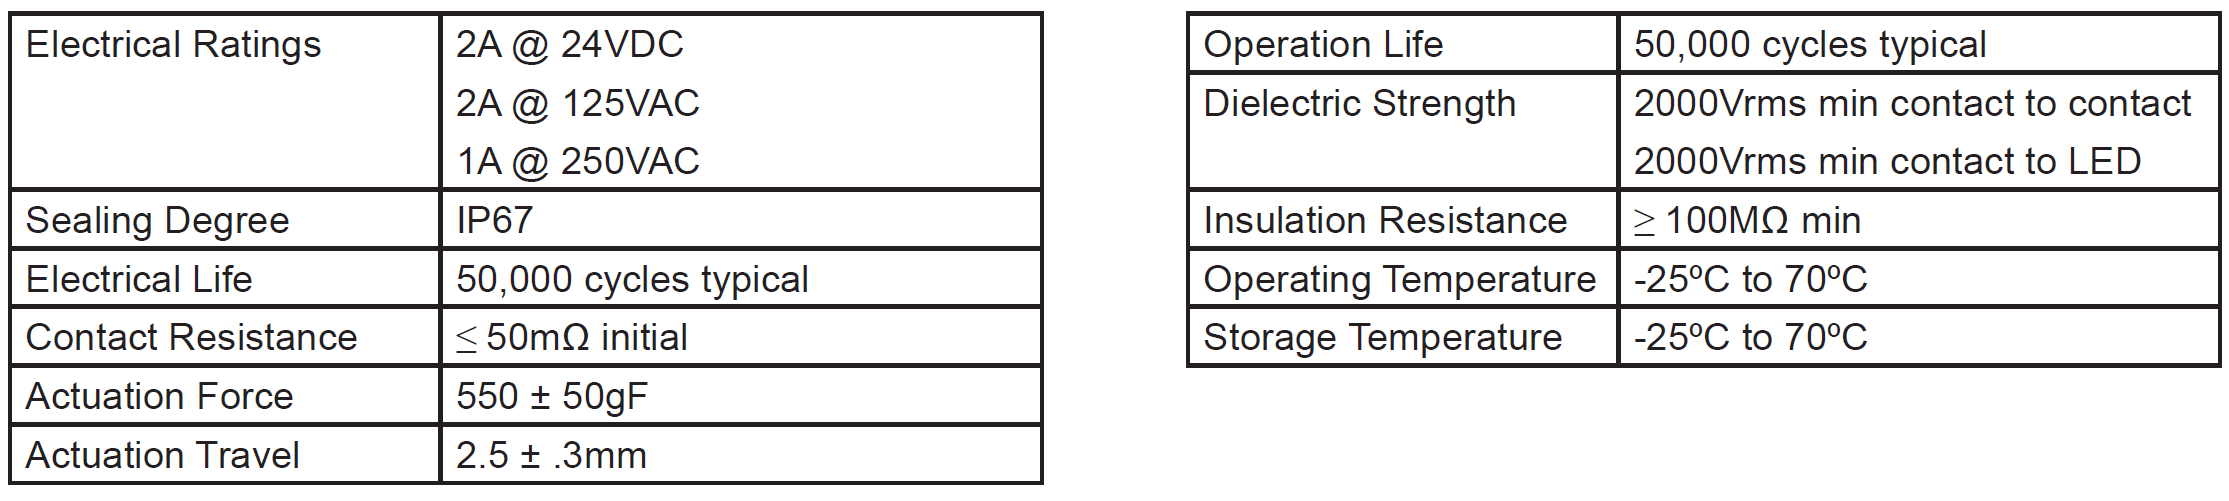 CIT DH40 Switch Specification Chart